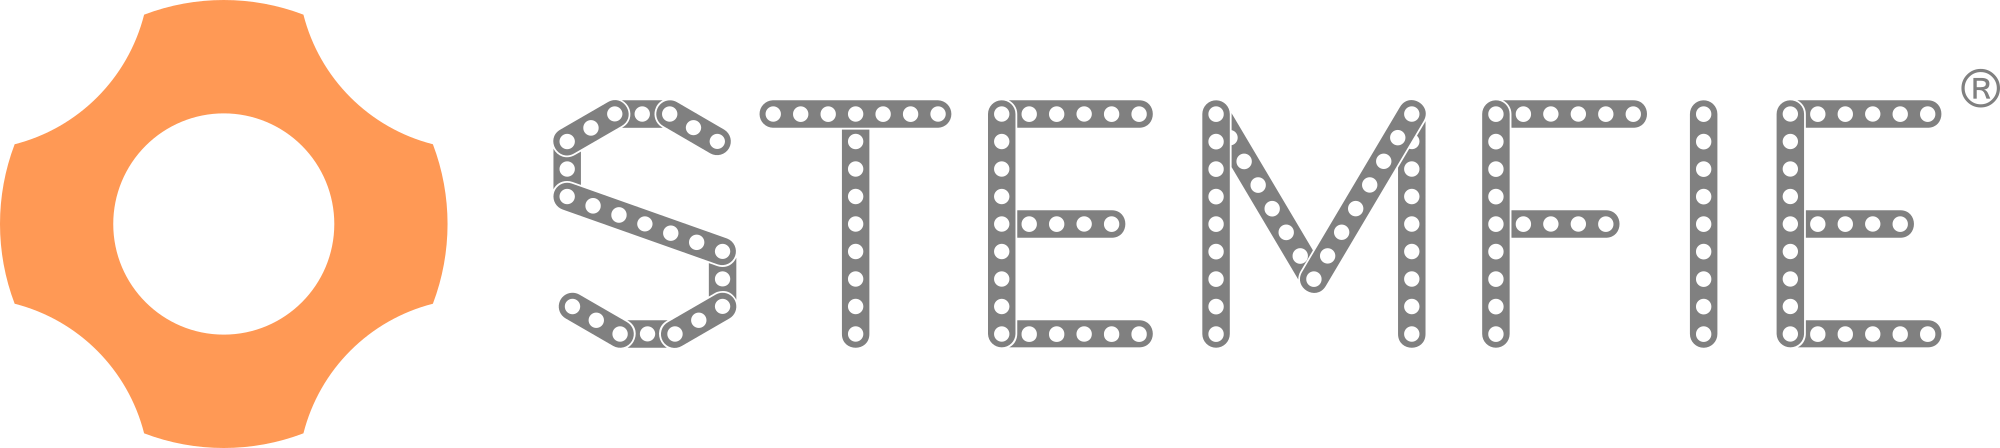 Download the STEMFIE logo and press kit